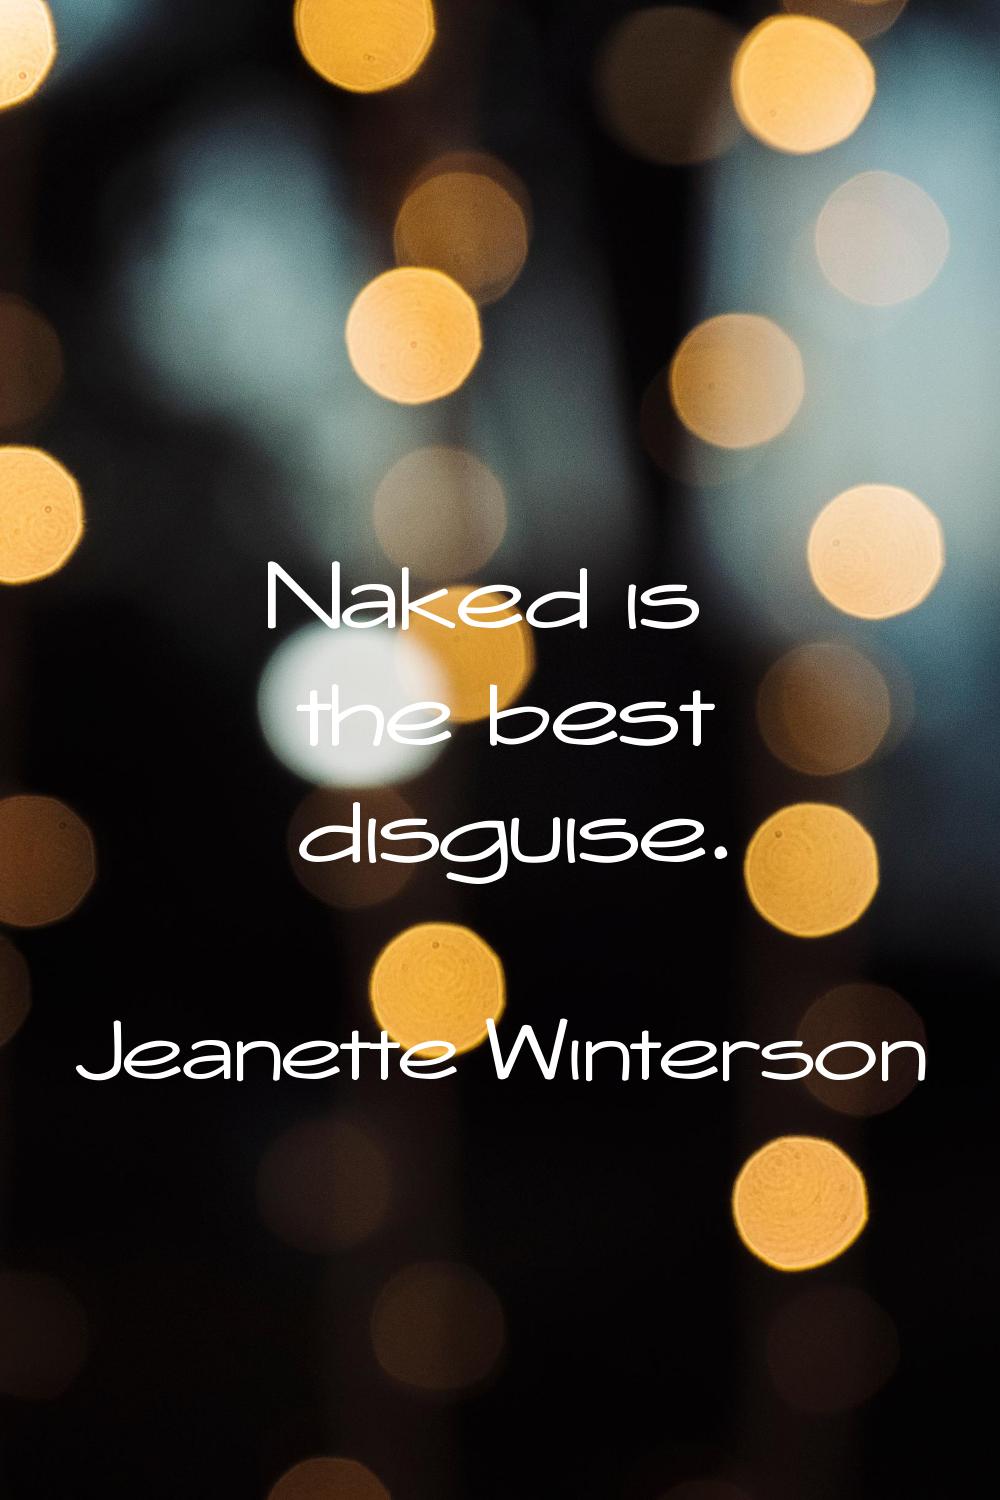 Naked is the best disguise.